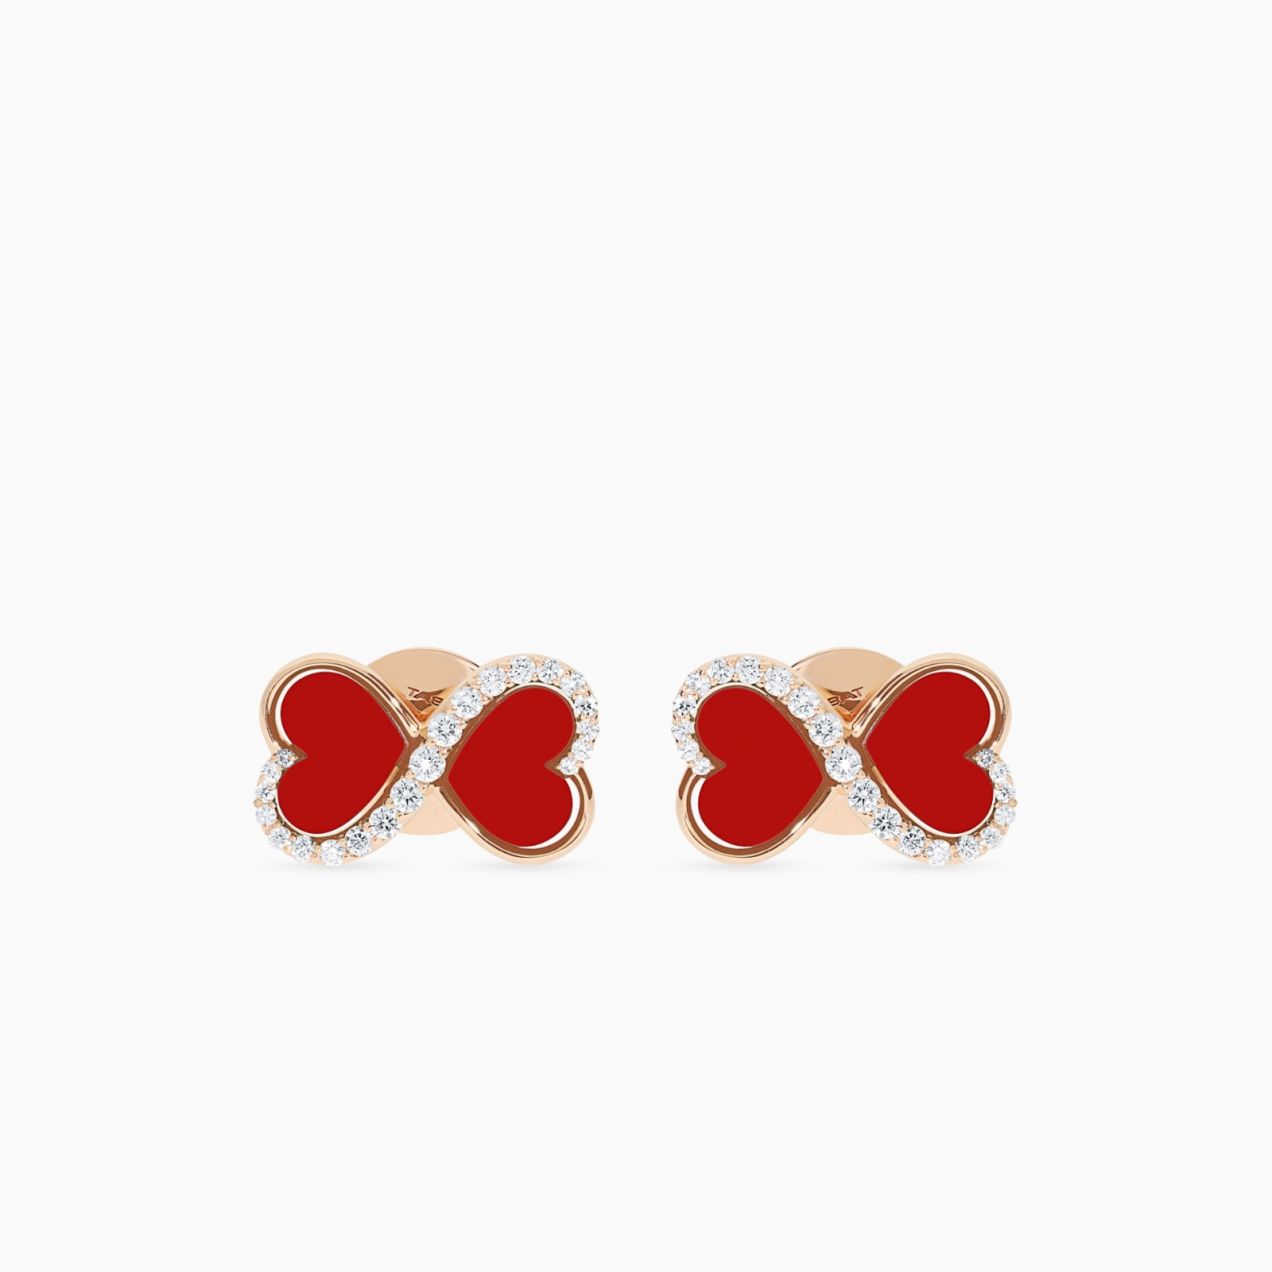 Rose gold button infinity symbol earrings with heart-cut coral and diamonds